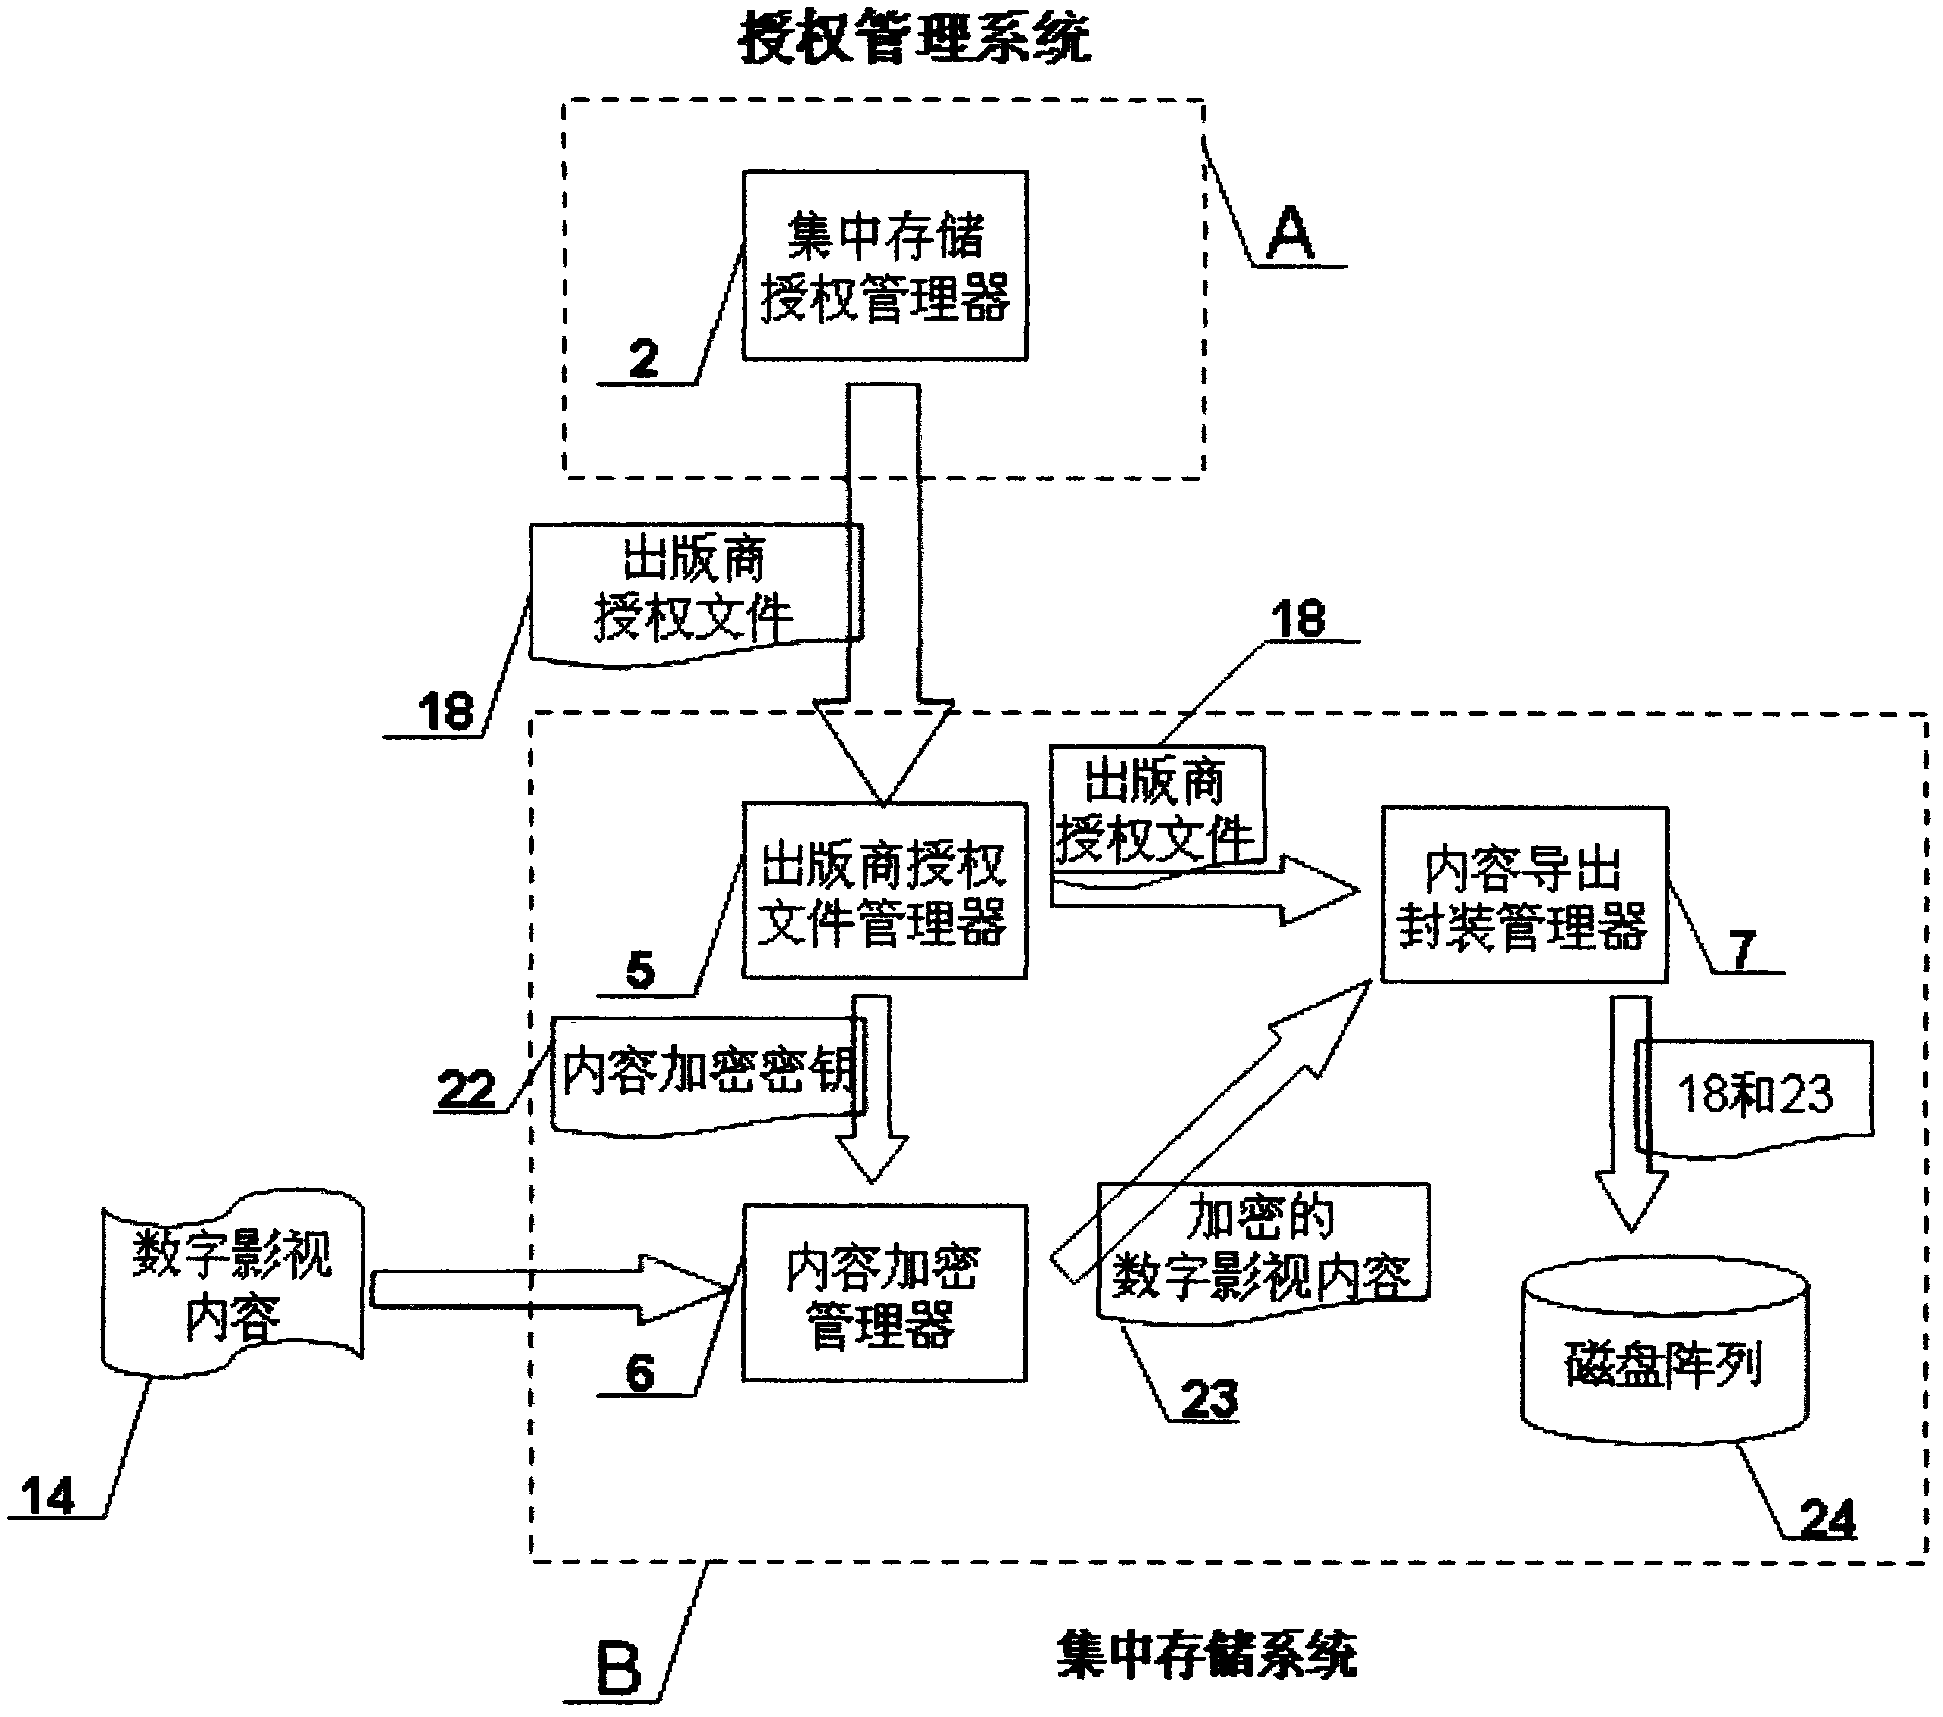 Copyright protecting method and device for publishing digital film and television by reproducible storage equipment